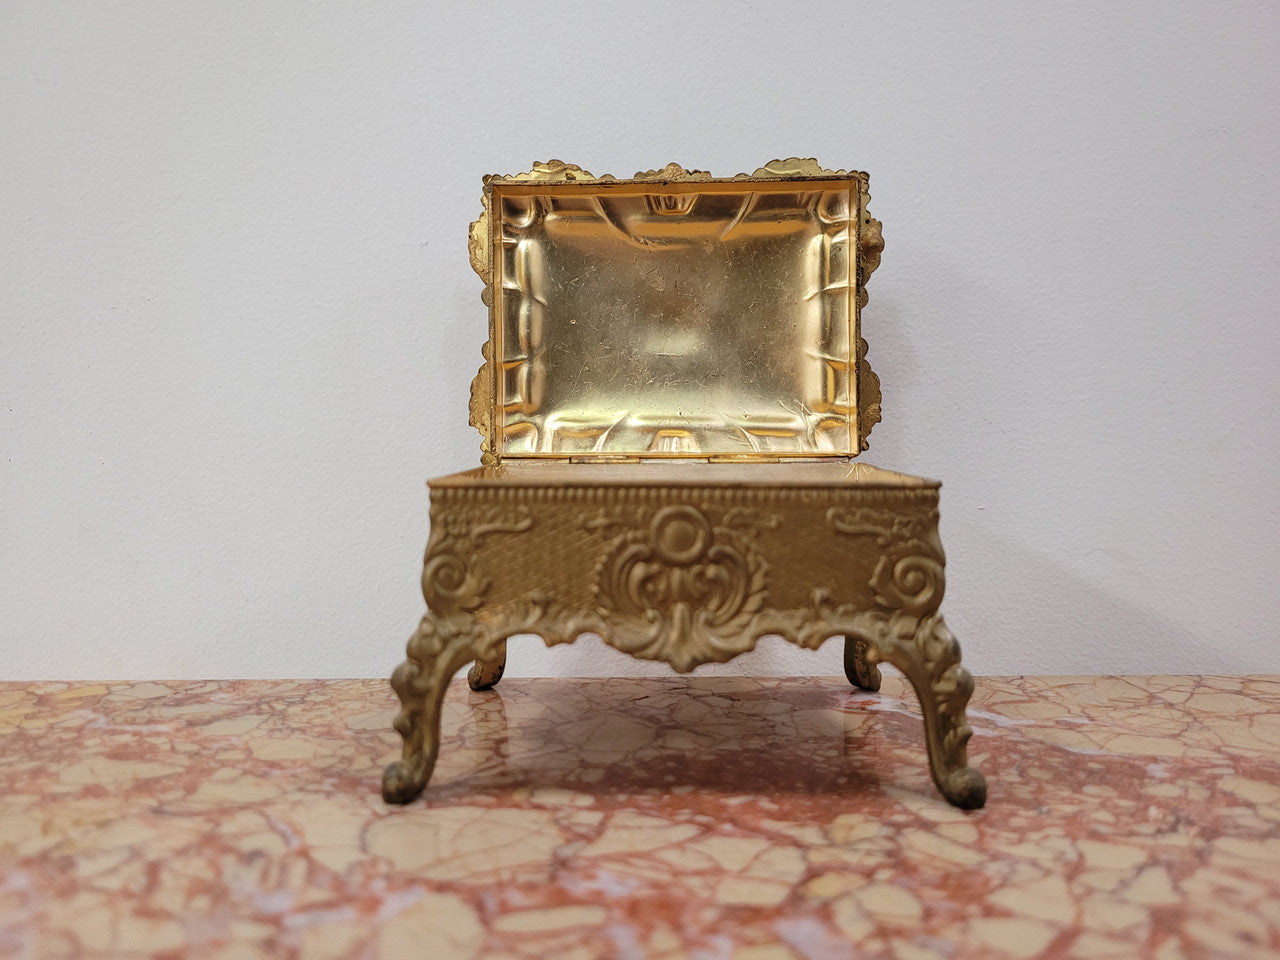 Lovely vintage gilded metal jewellery casket with cushion on the inside (can be removed).  In good original and detailed condition.